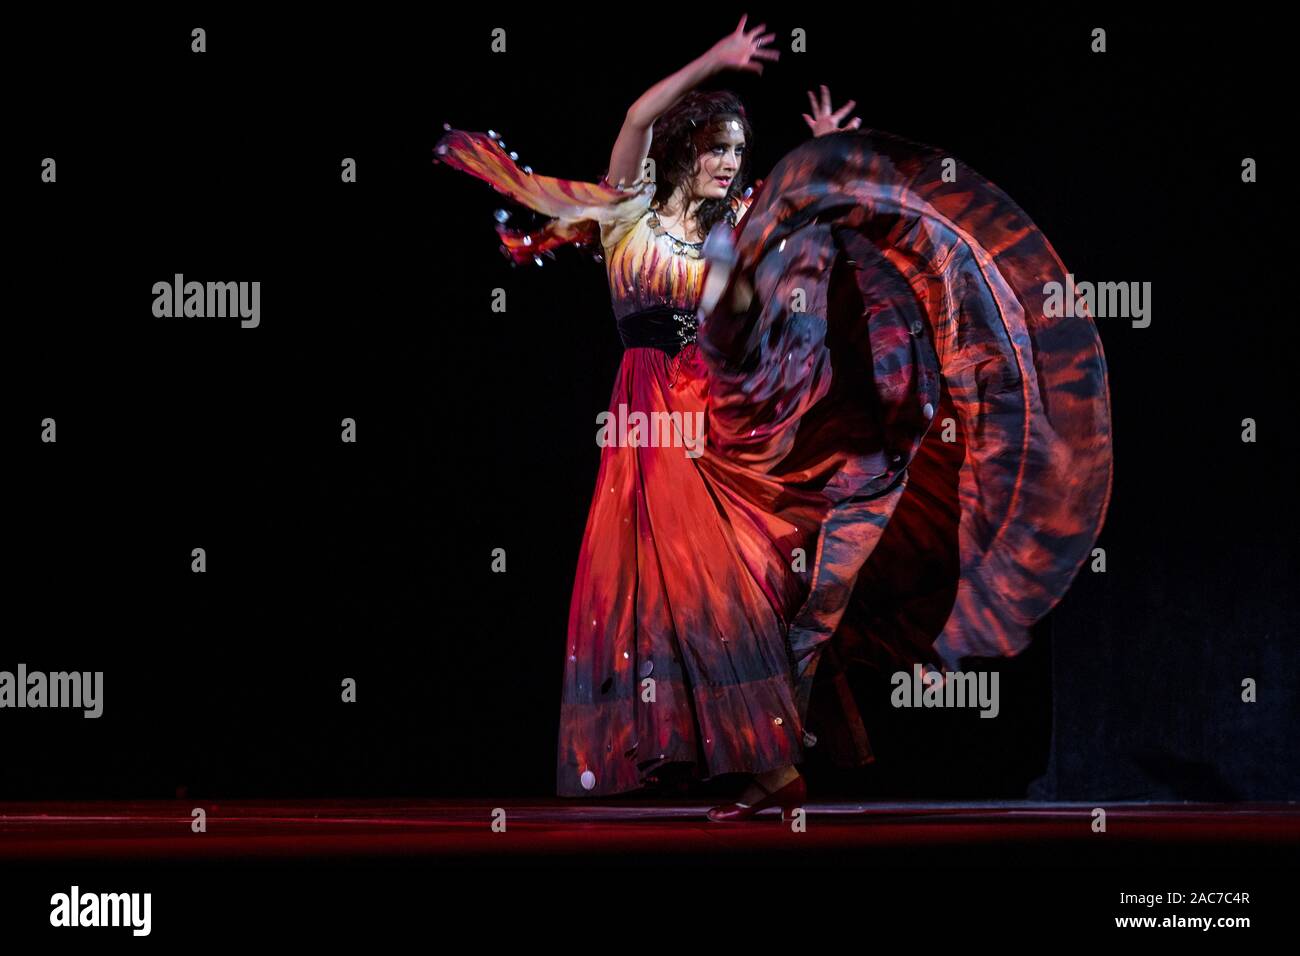 'Gypsy Dance' from the ballet 'Don Quixote' performed by the ballet-dancer Aysylu Mirkhafyzkhan at a stage in a theatre in Moscow, Russia Stock Photo